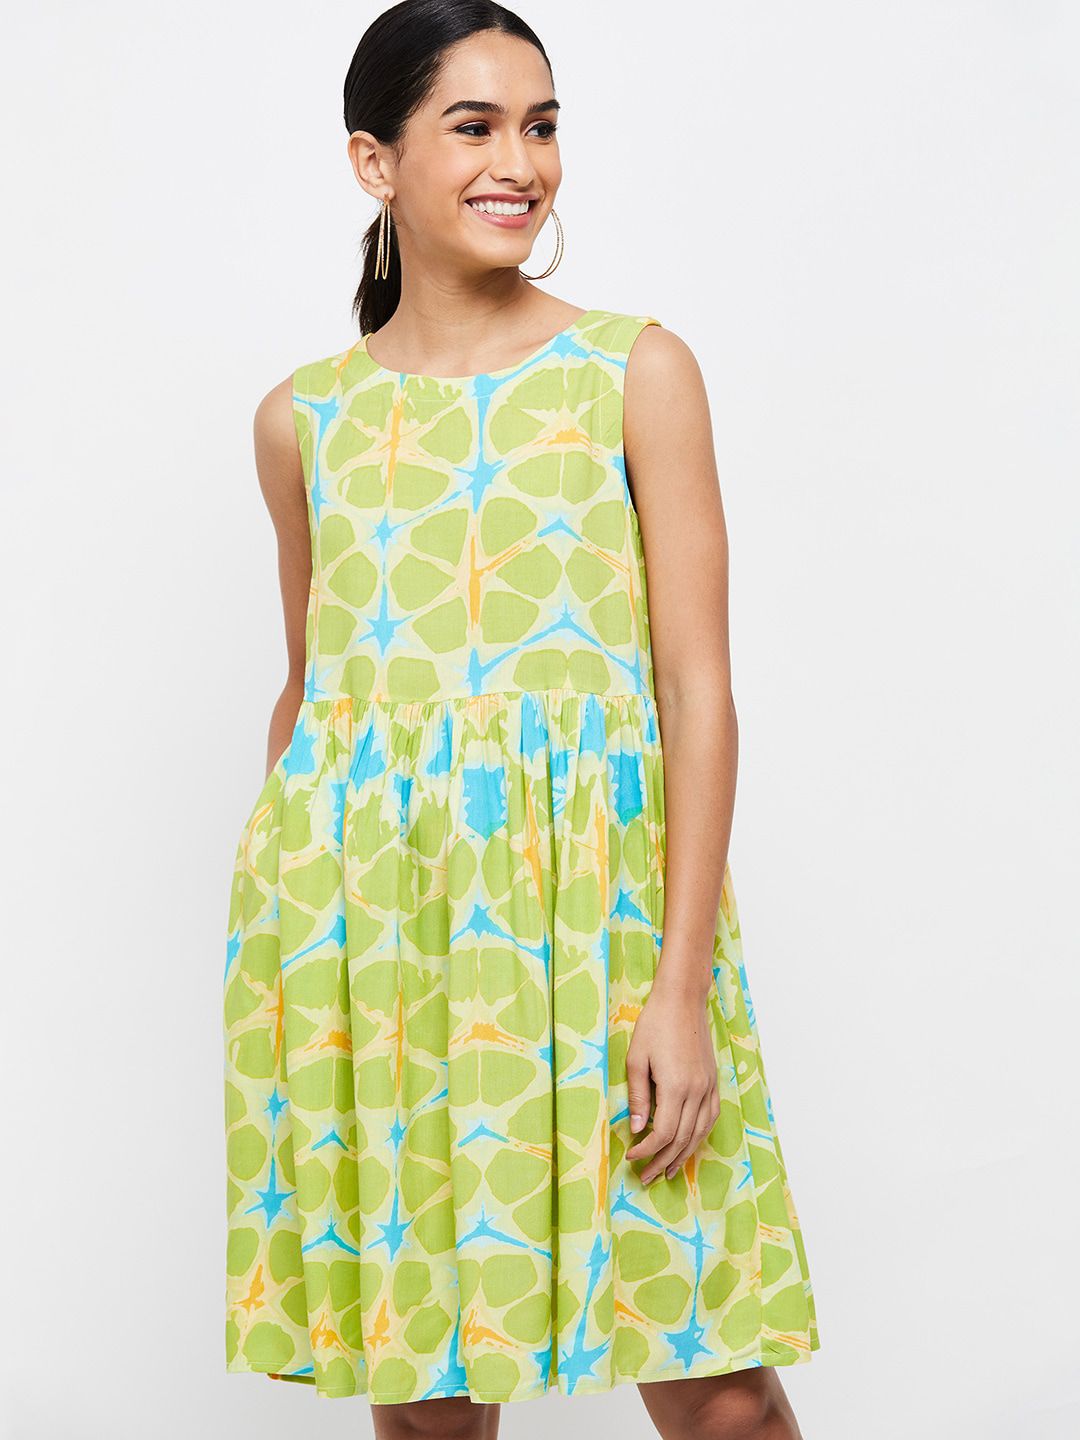 max Green Printed Fit & Flare Dress Price in India